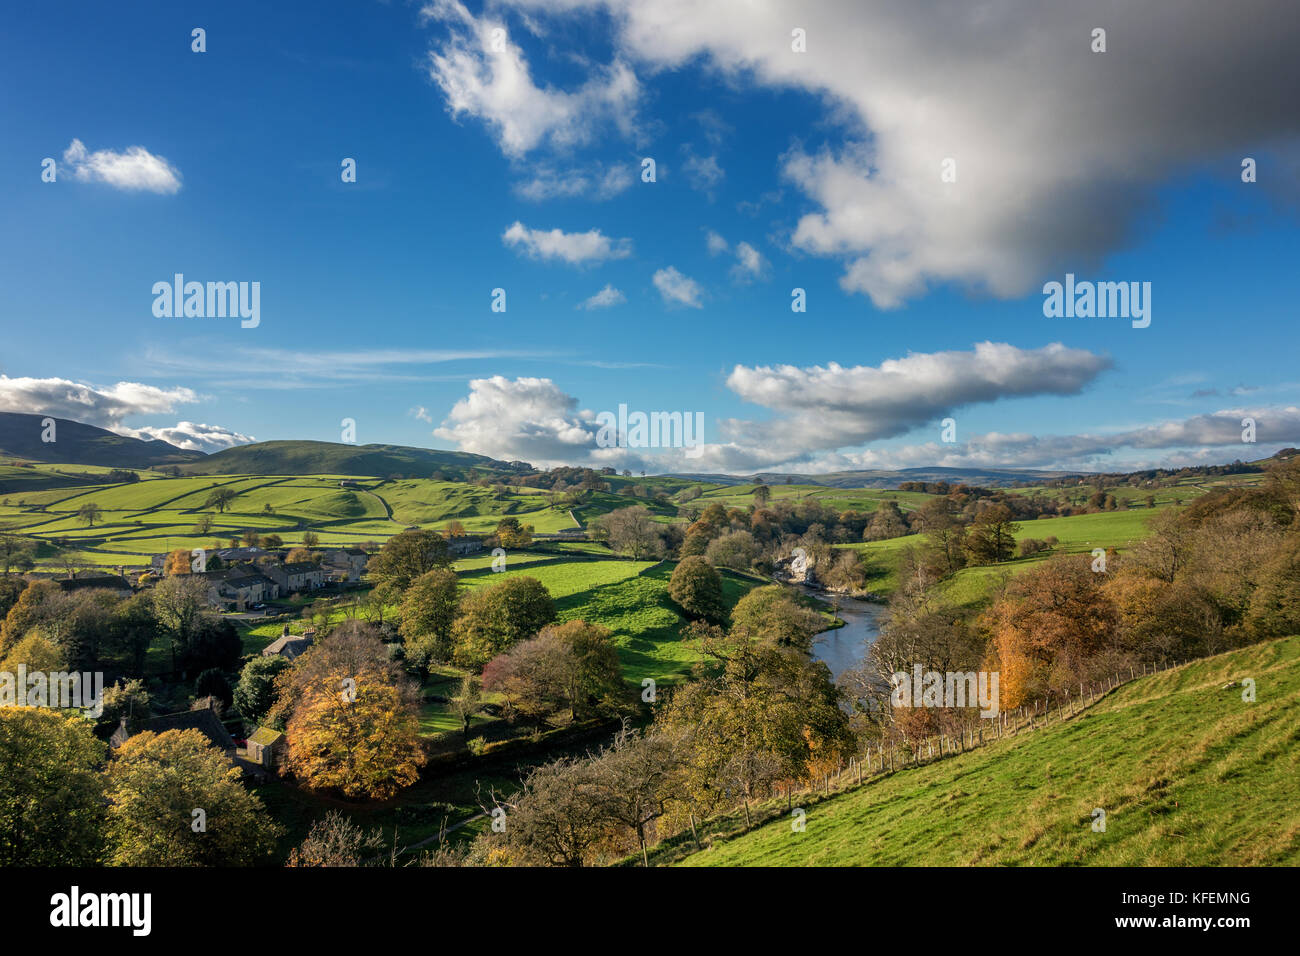 UK scenic: Stunning view of the countryside up the River Wharfe & Wharfedale valley from above rural Burnsall in beautiful weather, Yorkshire Dales Stock Photo